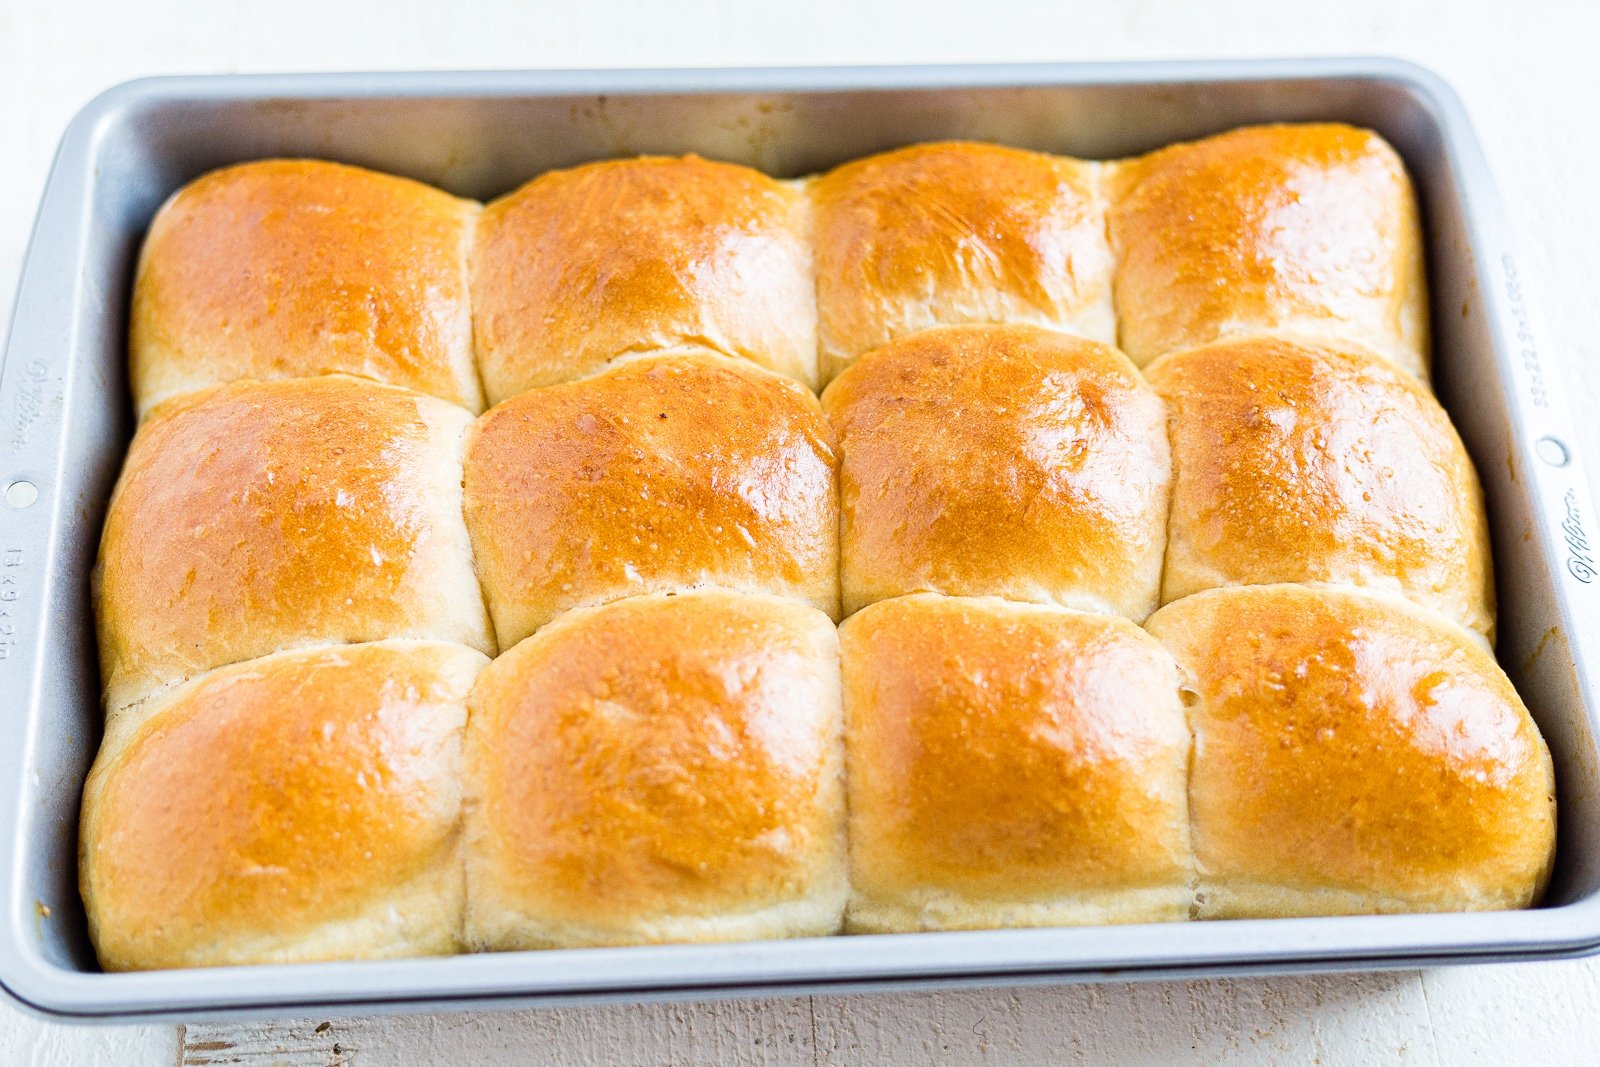 12 baked sourdough rolls in the pan with golden brown tops